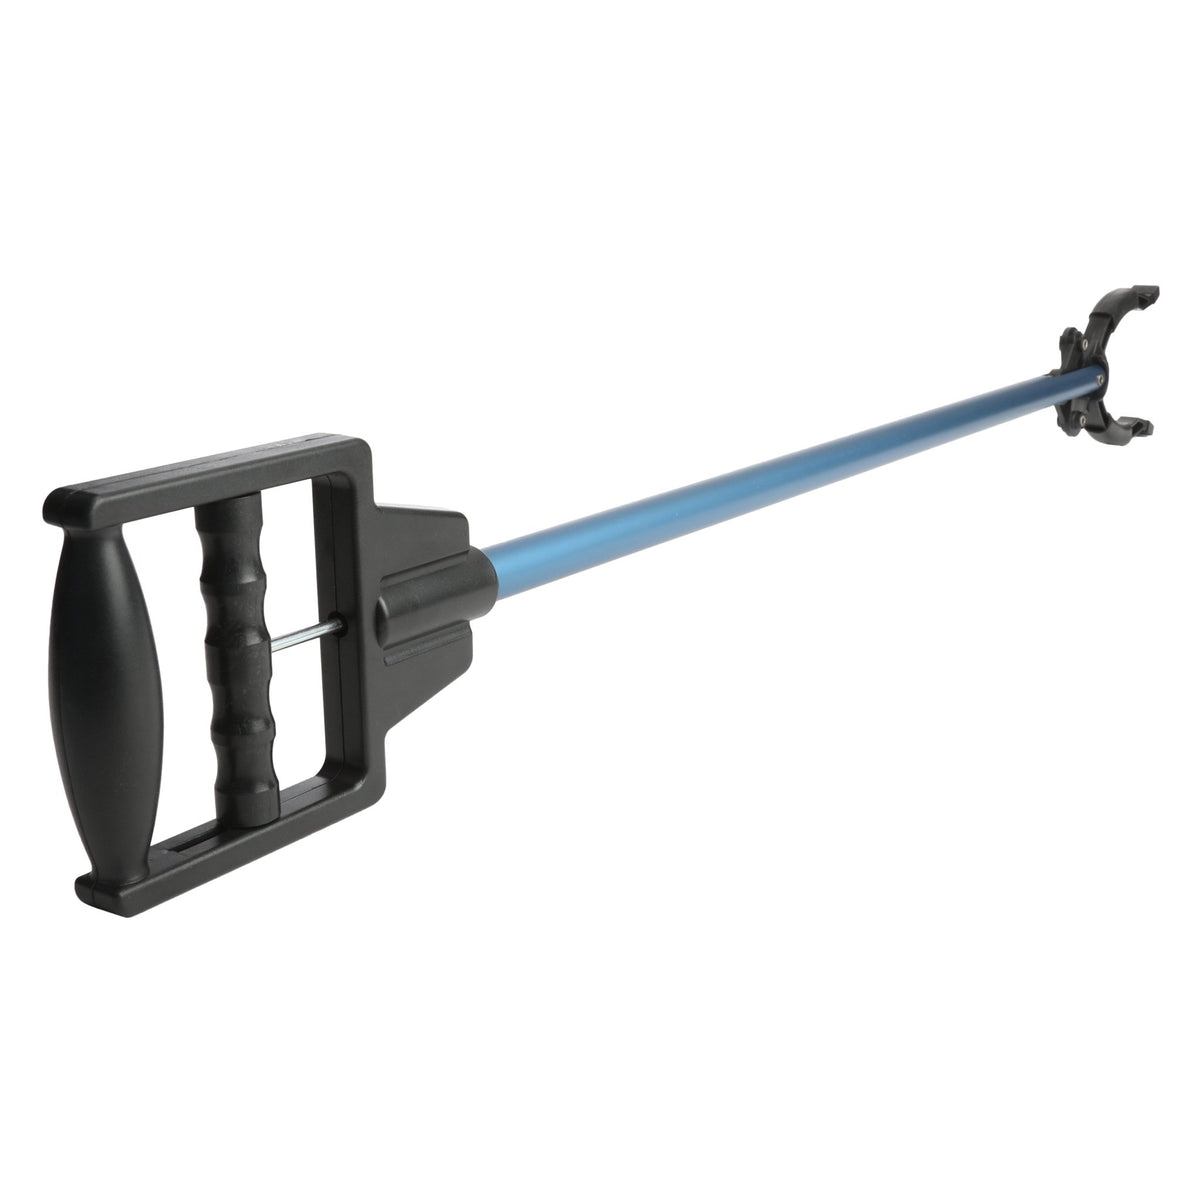 AHS 31 Inch Reacher - Grabber-Style Reaching Tool with Non-Slip Pad - American Hospital Supply